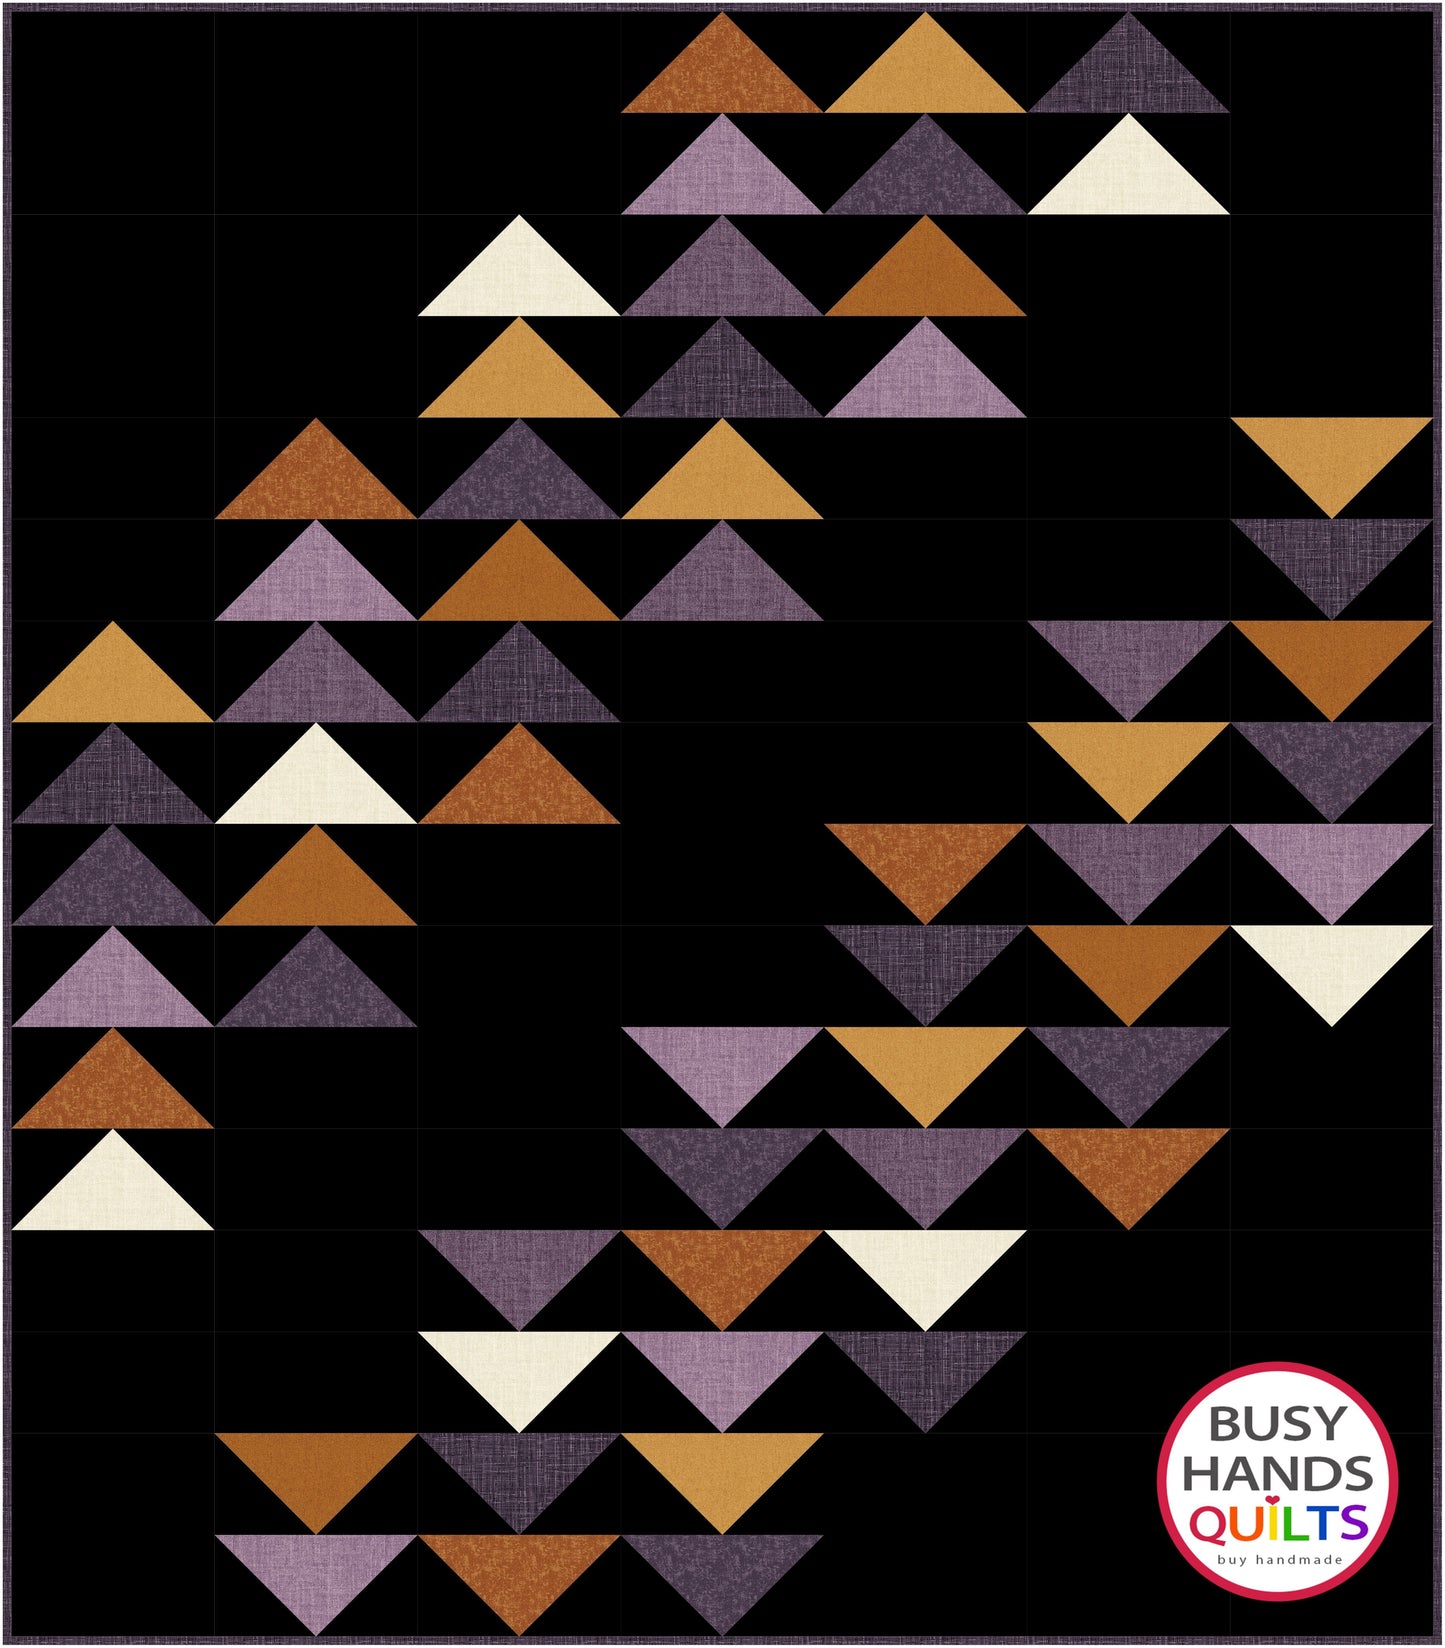 Formation Quilt Pattern PRINTED